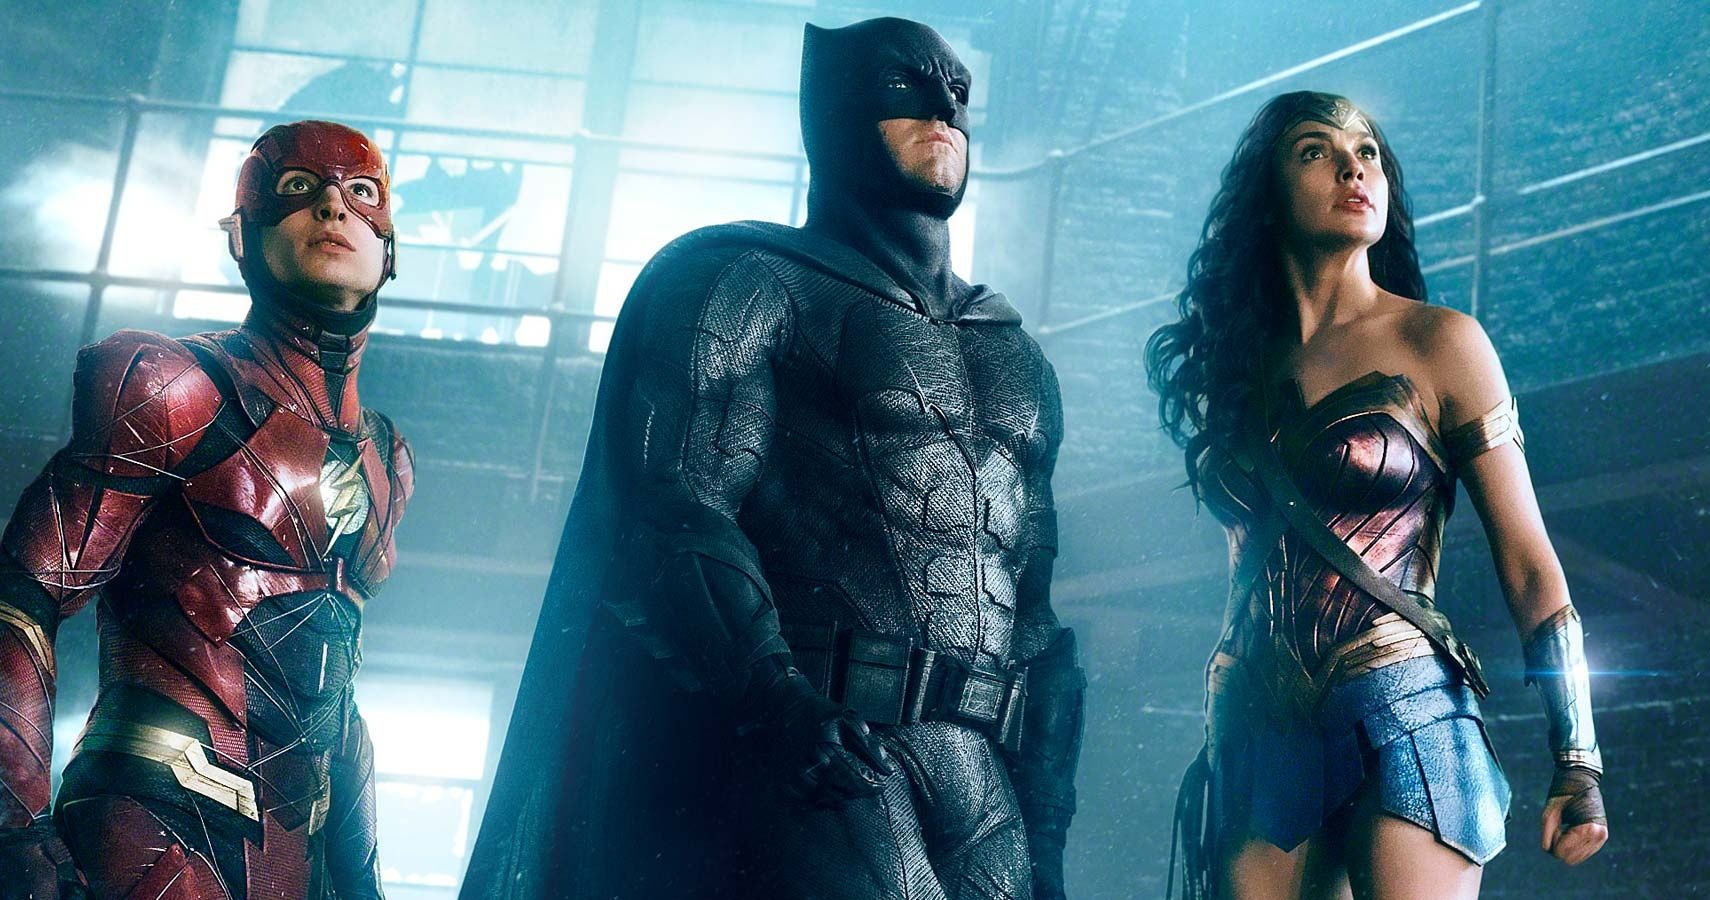 5 Reasons Why Justice League Isn’t As Bad As People Say It Is (& 5 Reasons It Is)